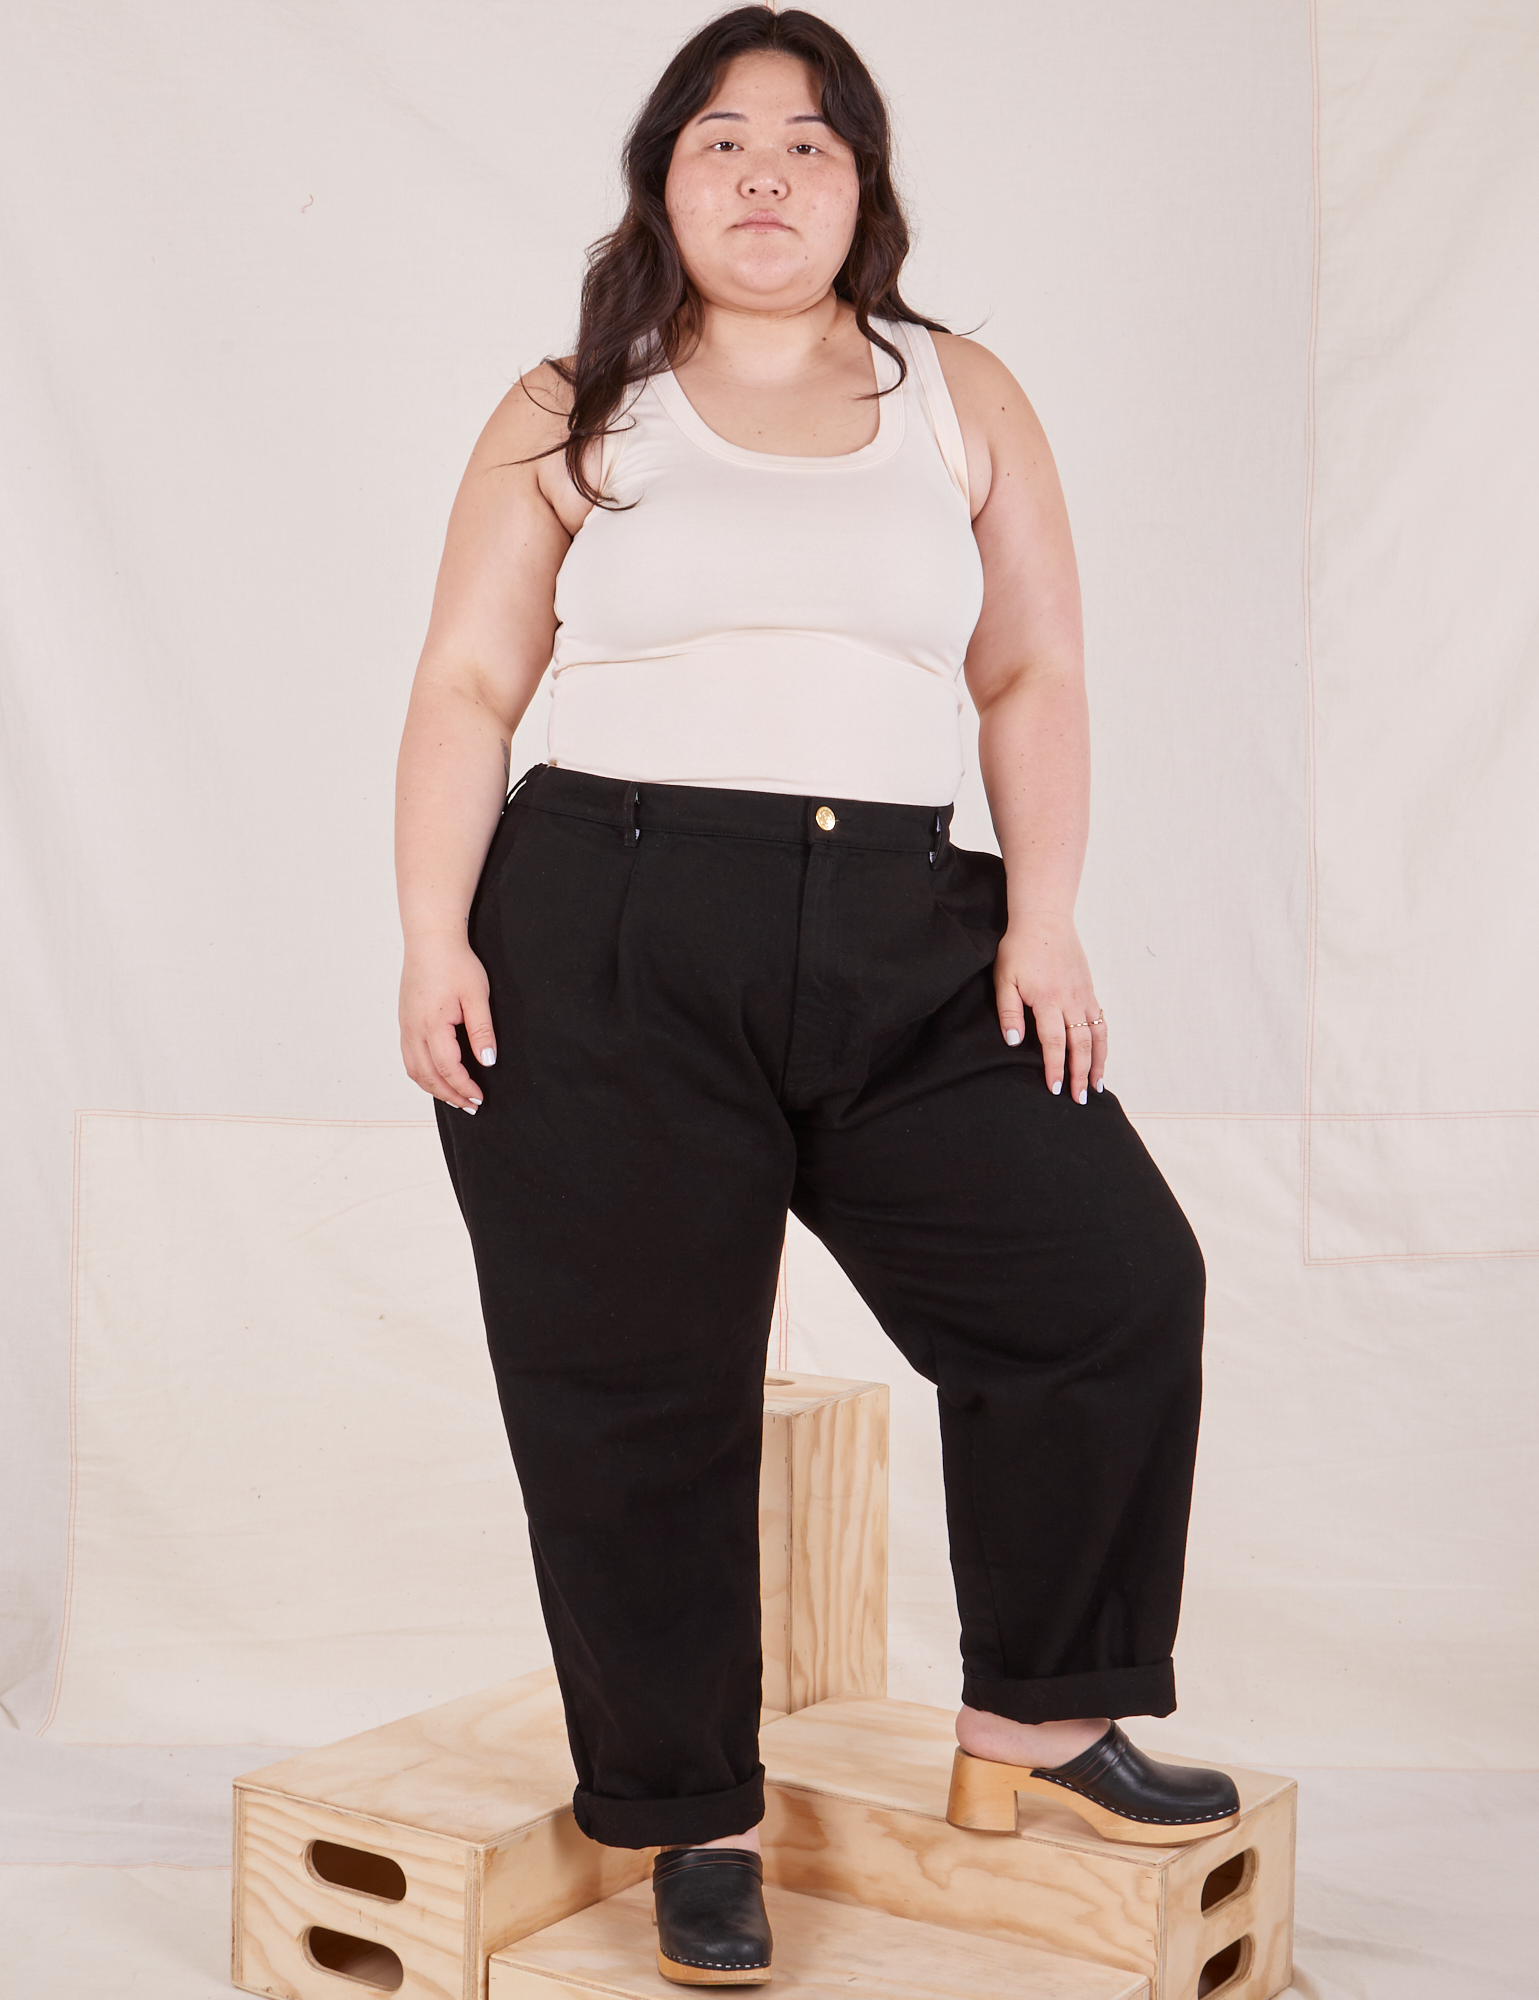 Ashley is 5'7" and wearing 1XL Denim Trouser Jeans in Black paired with Tank Top vintage tee off-white